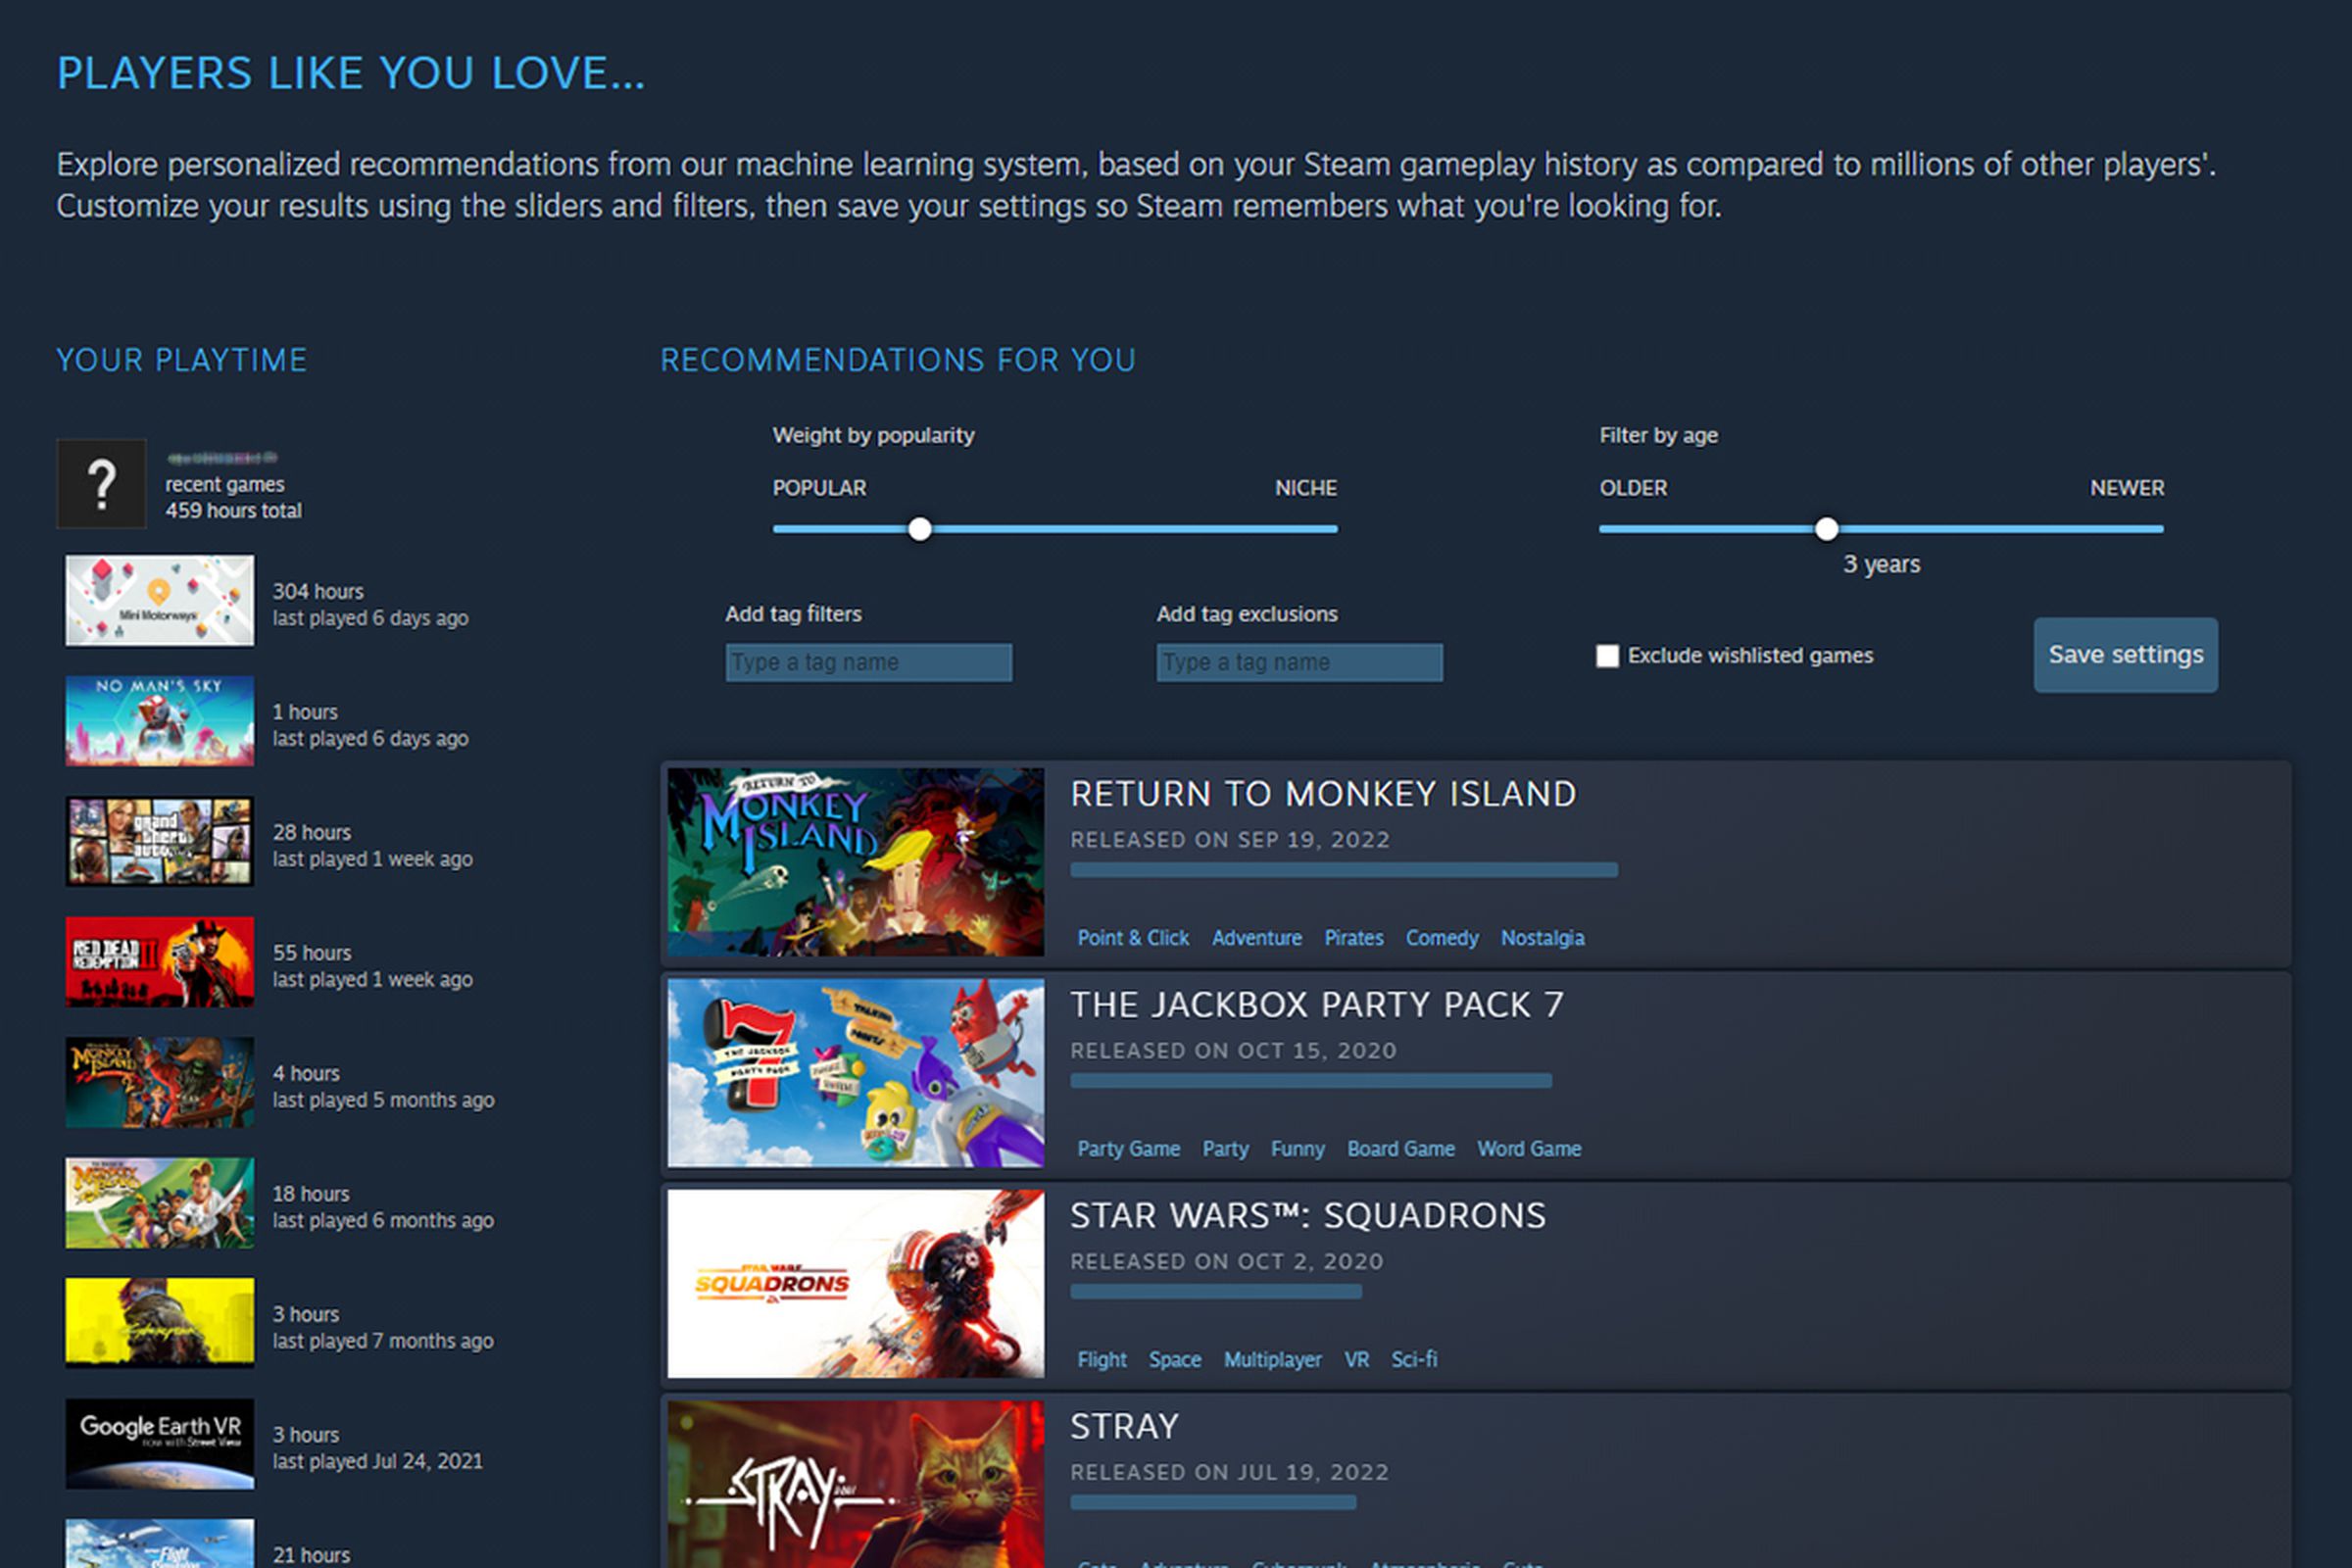 Steam page with title “PLAYERS LIKE YOU LOVE...” and below that lists of games you’ve played on the left and a list of recommended games in center.